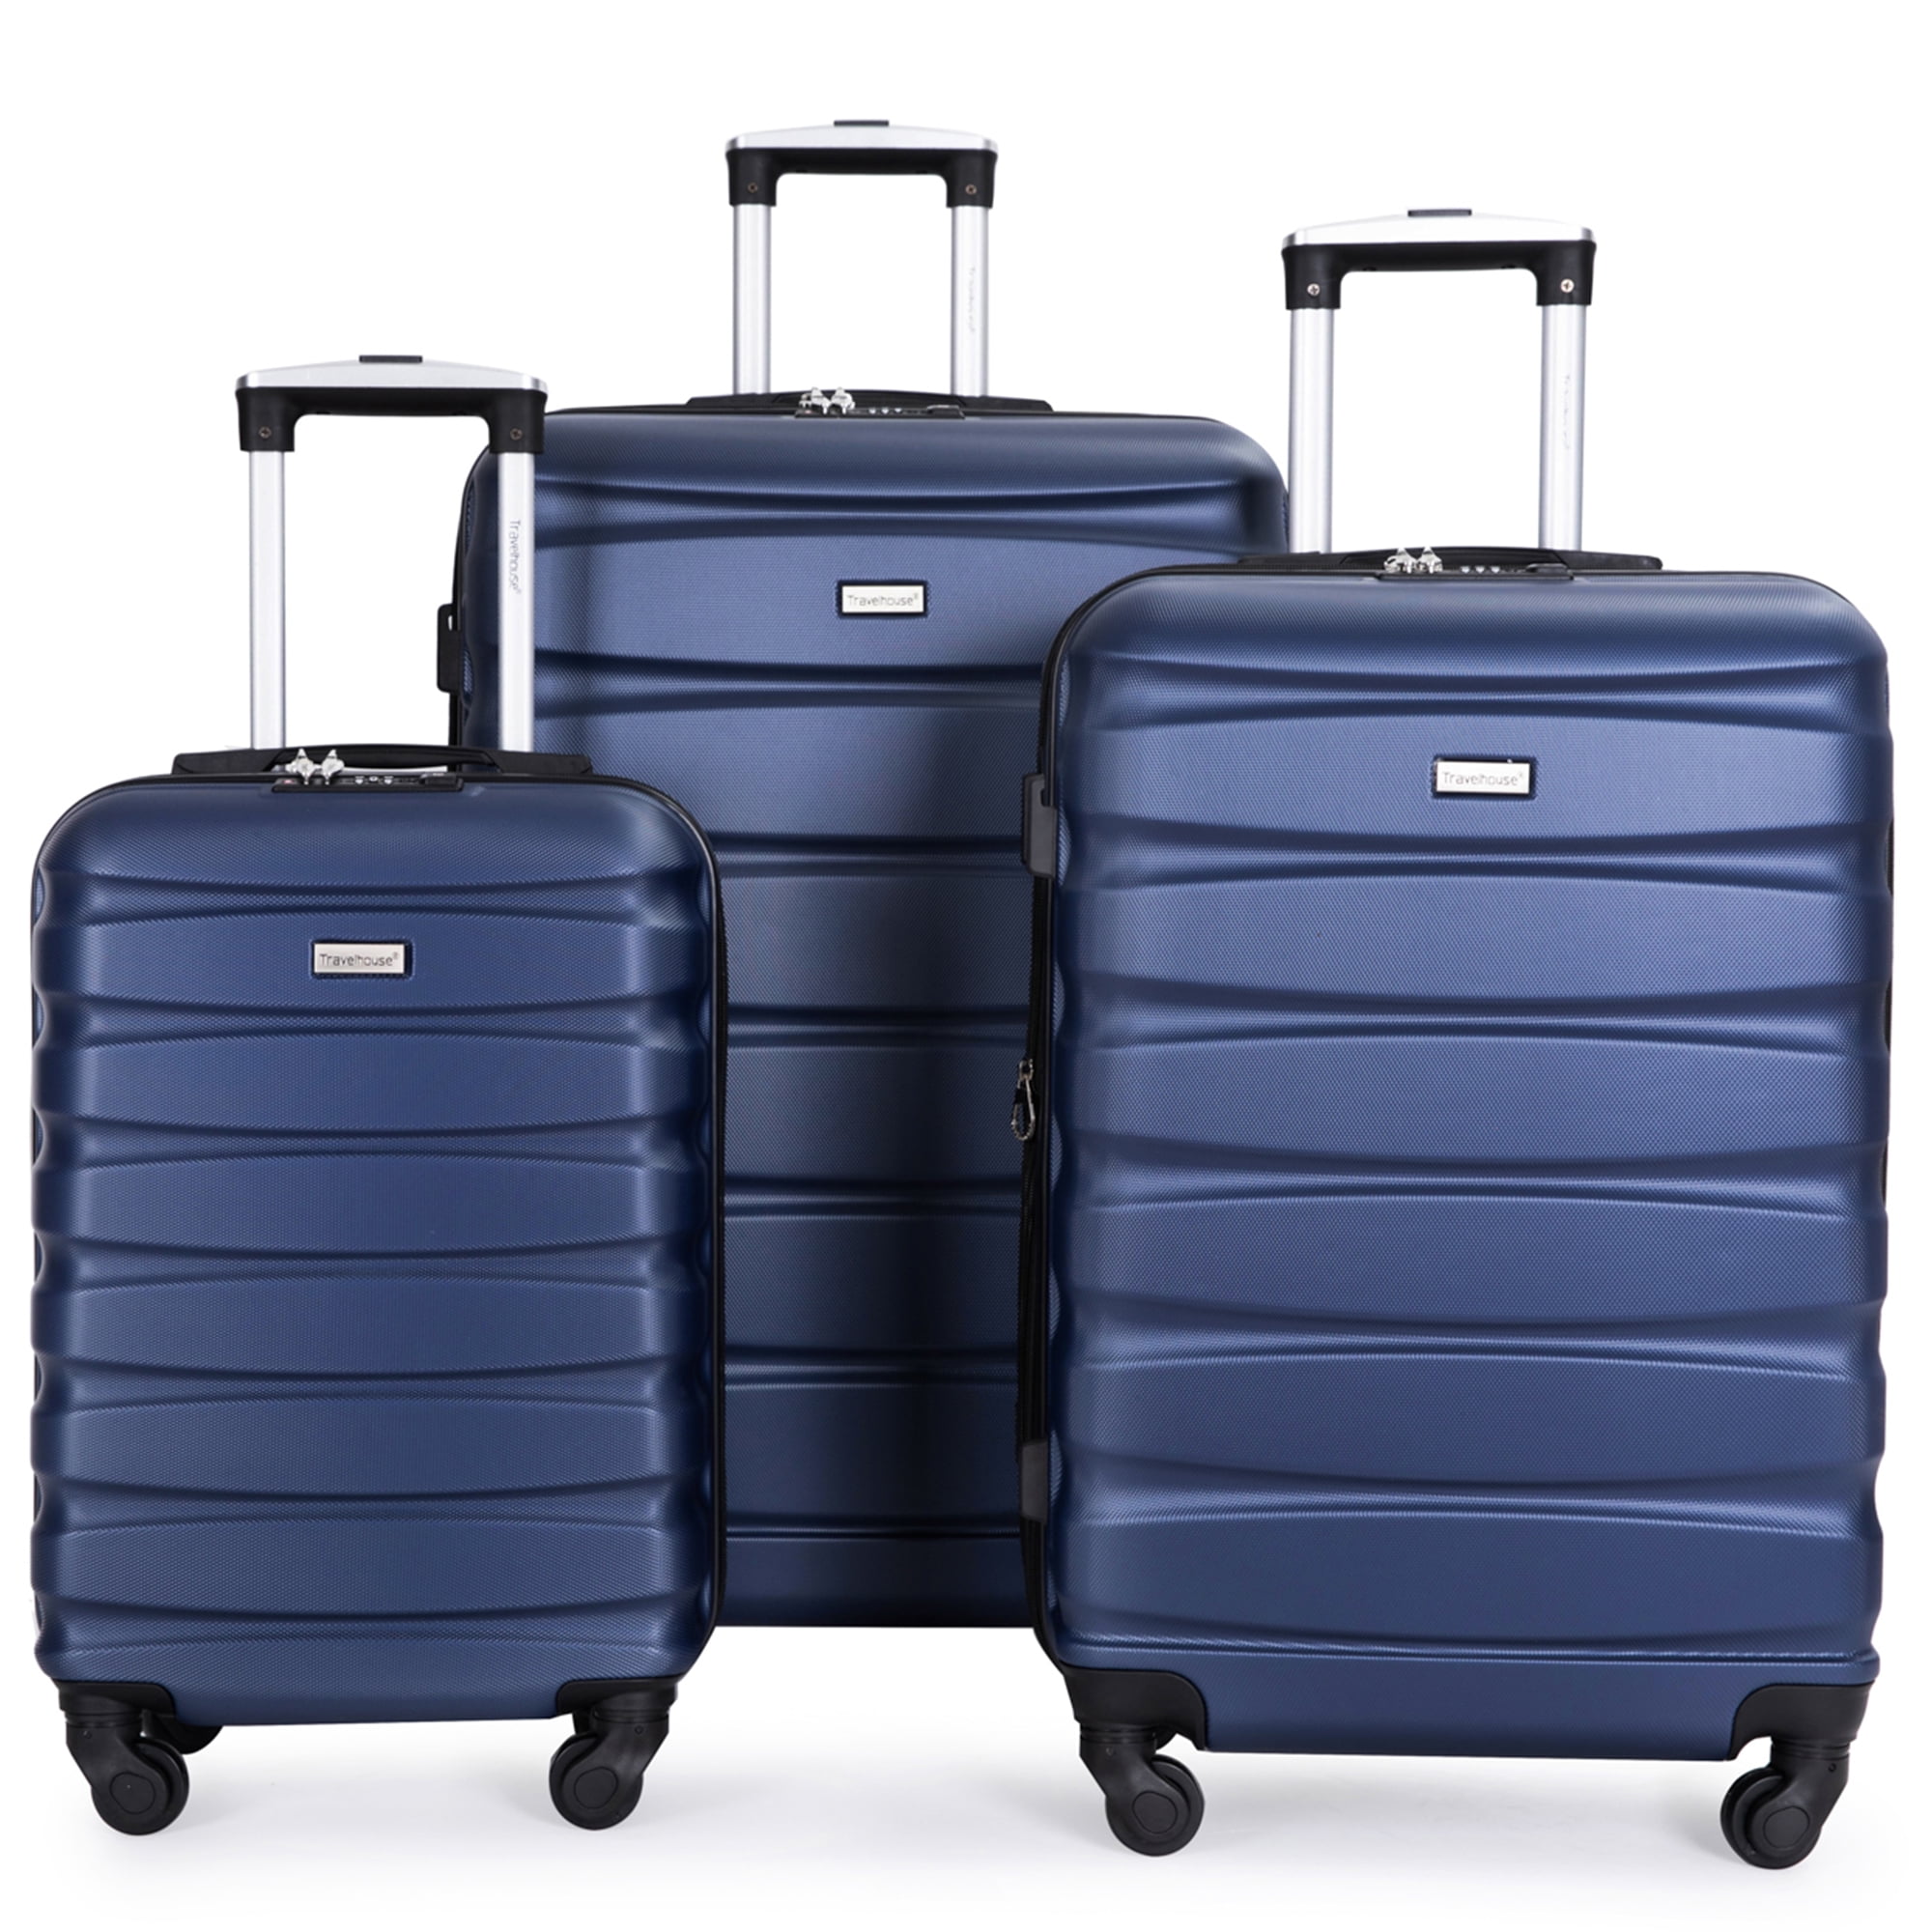 Travel Luggage Set of 3, Paproos Lightweight Hardside Suitcase with ...